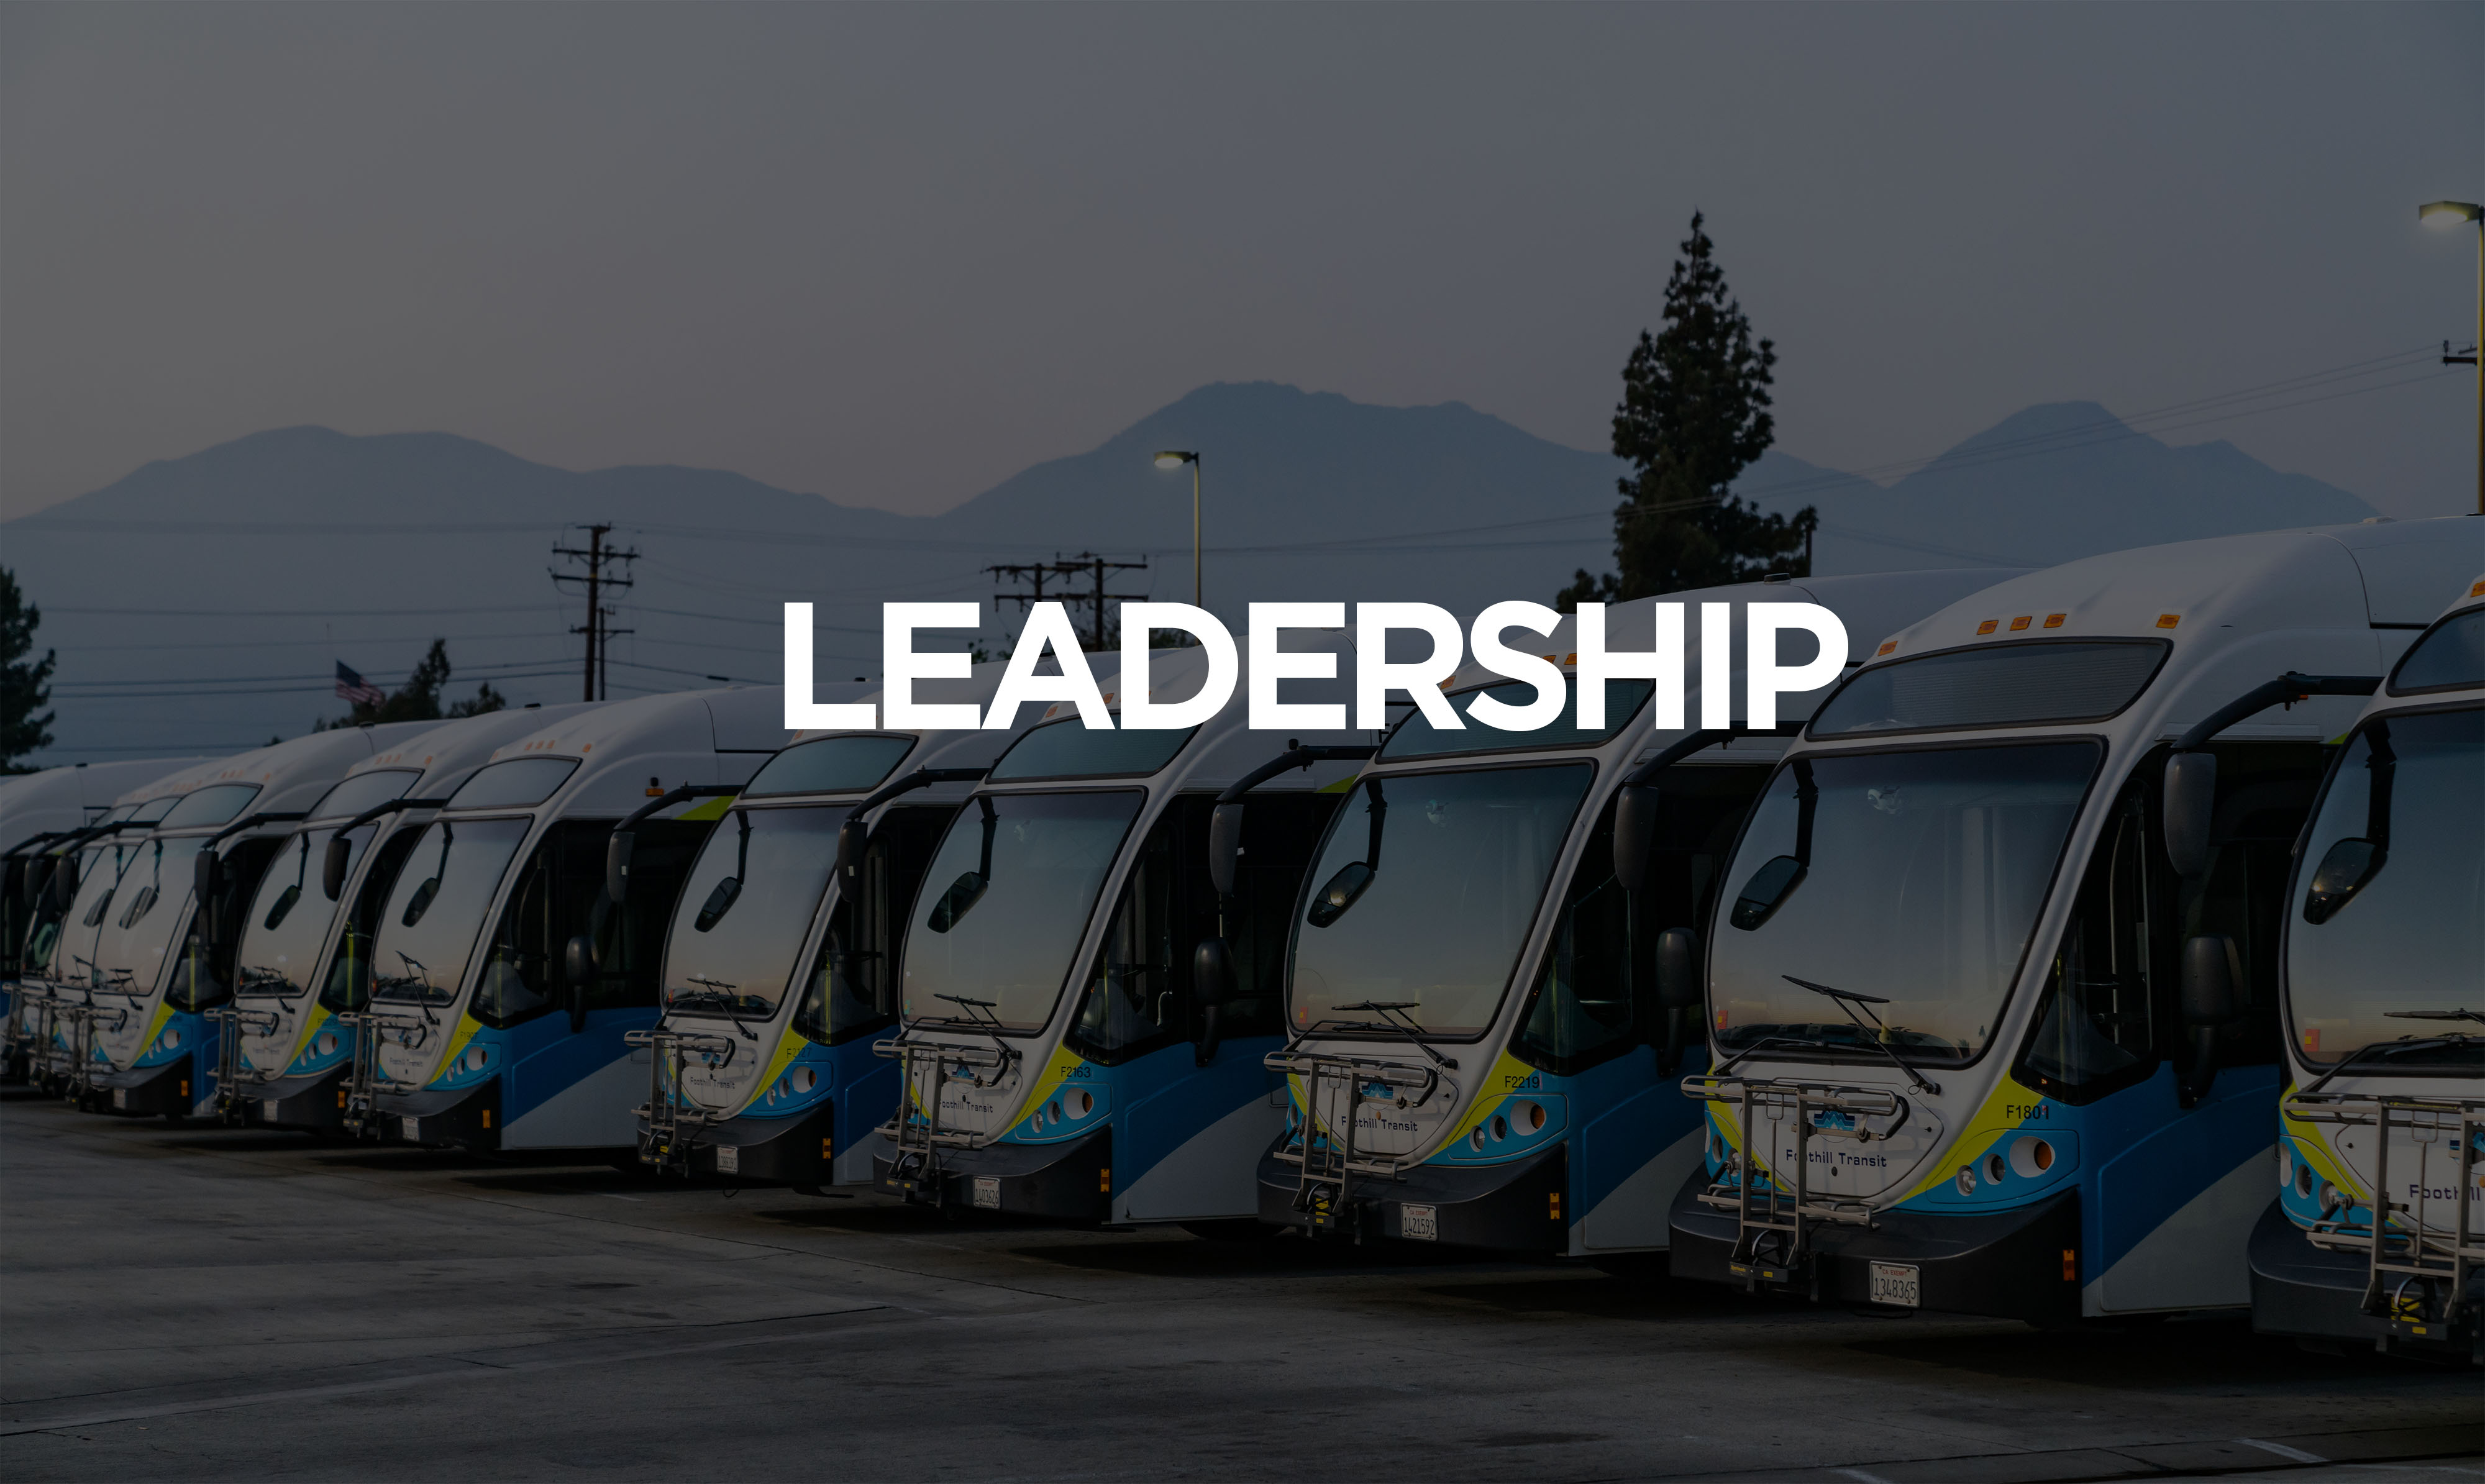 10 Buses Parked in Line Showed from Front with Leadership